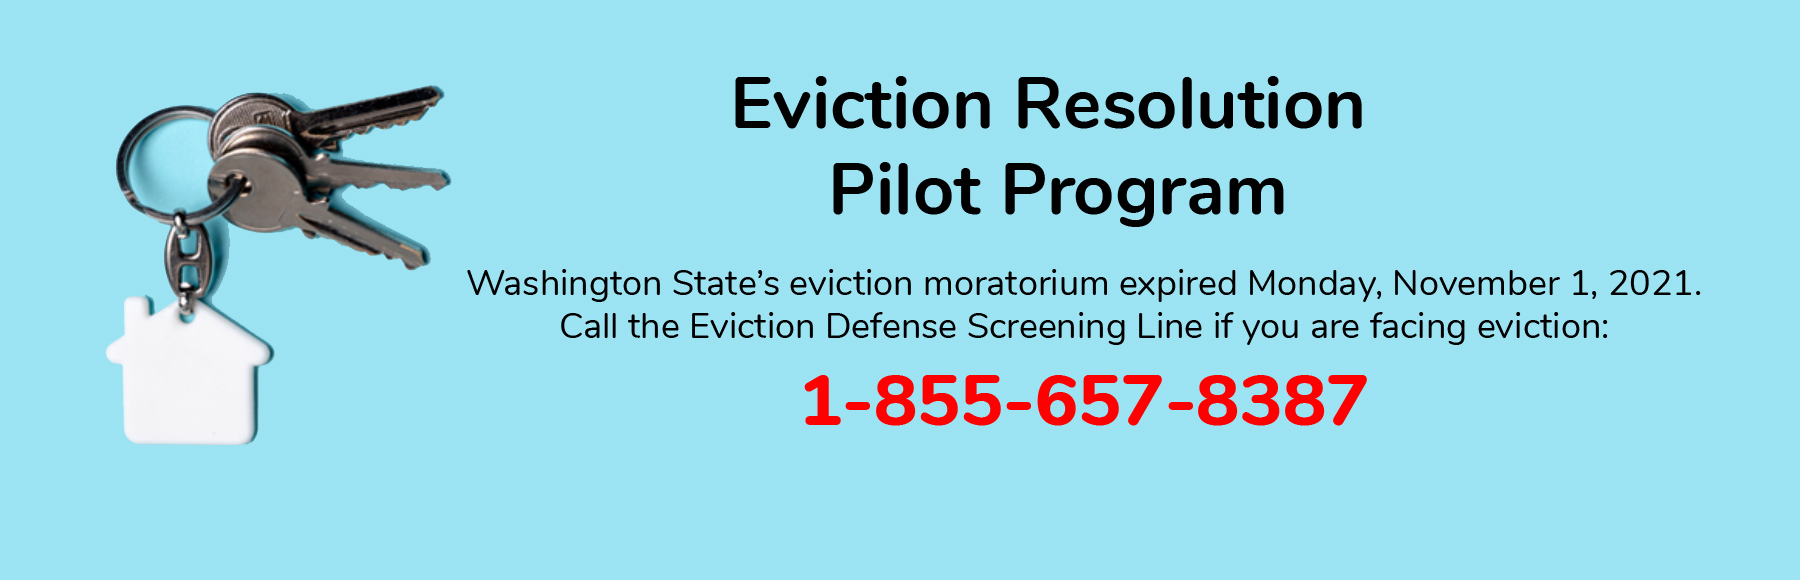 Washington State launches Eviction Resolution Pilot Program (ERPP) for families facing eviction.